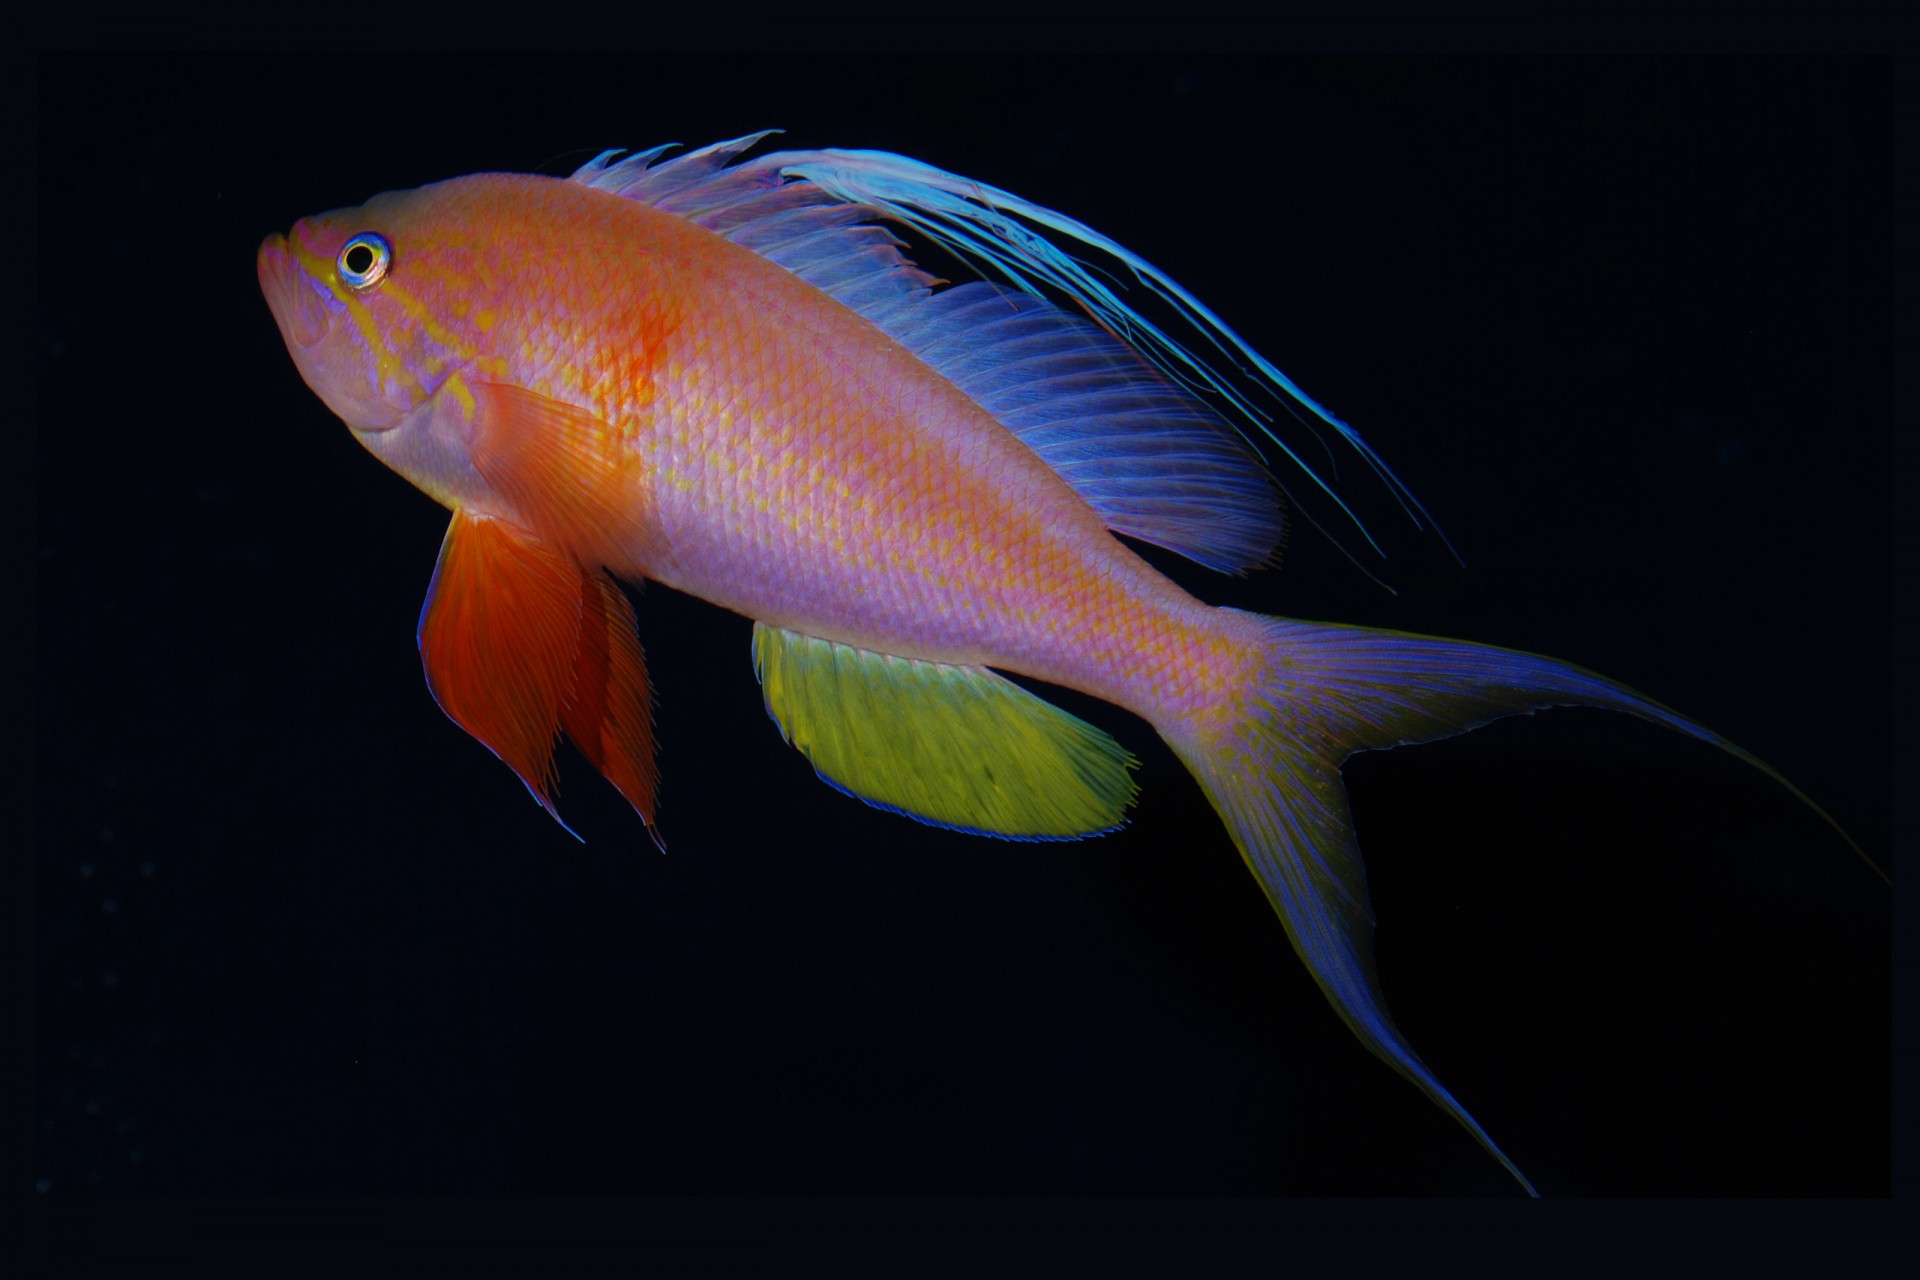 Baldwinella vivanos, one of STRI staff scientist D. Ross Robertson’s favorite new fish species discovered in the rariphotic